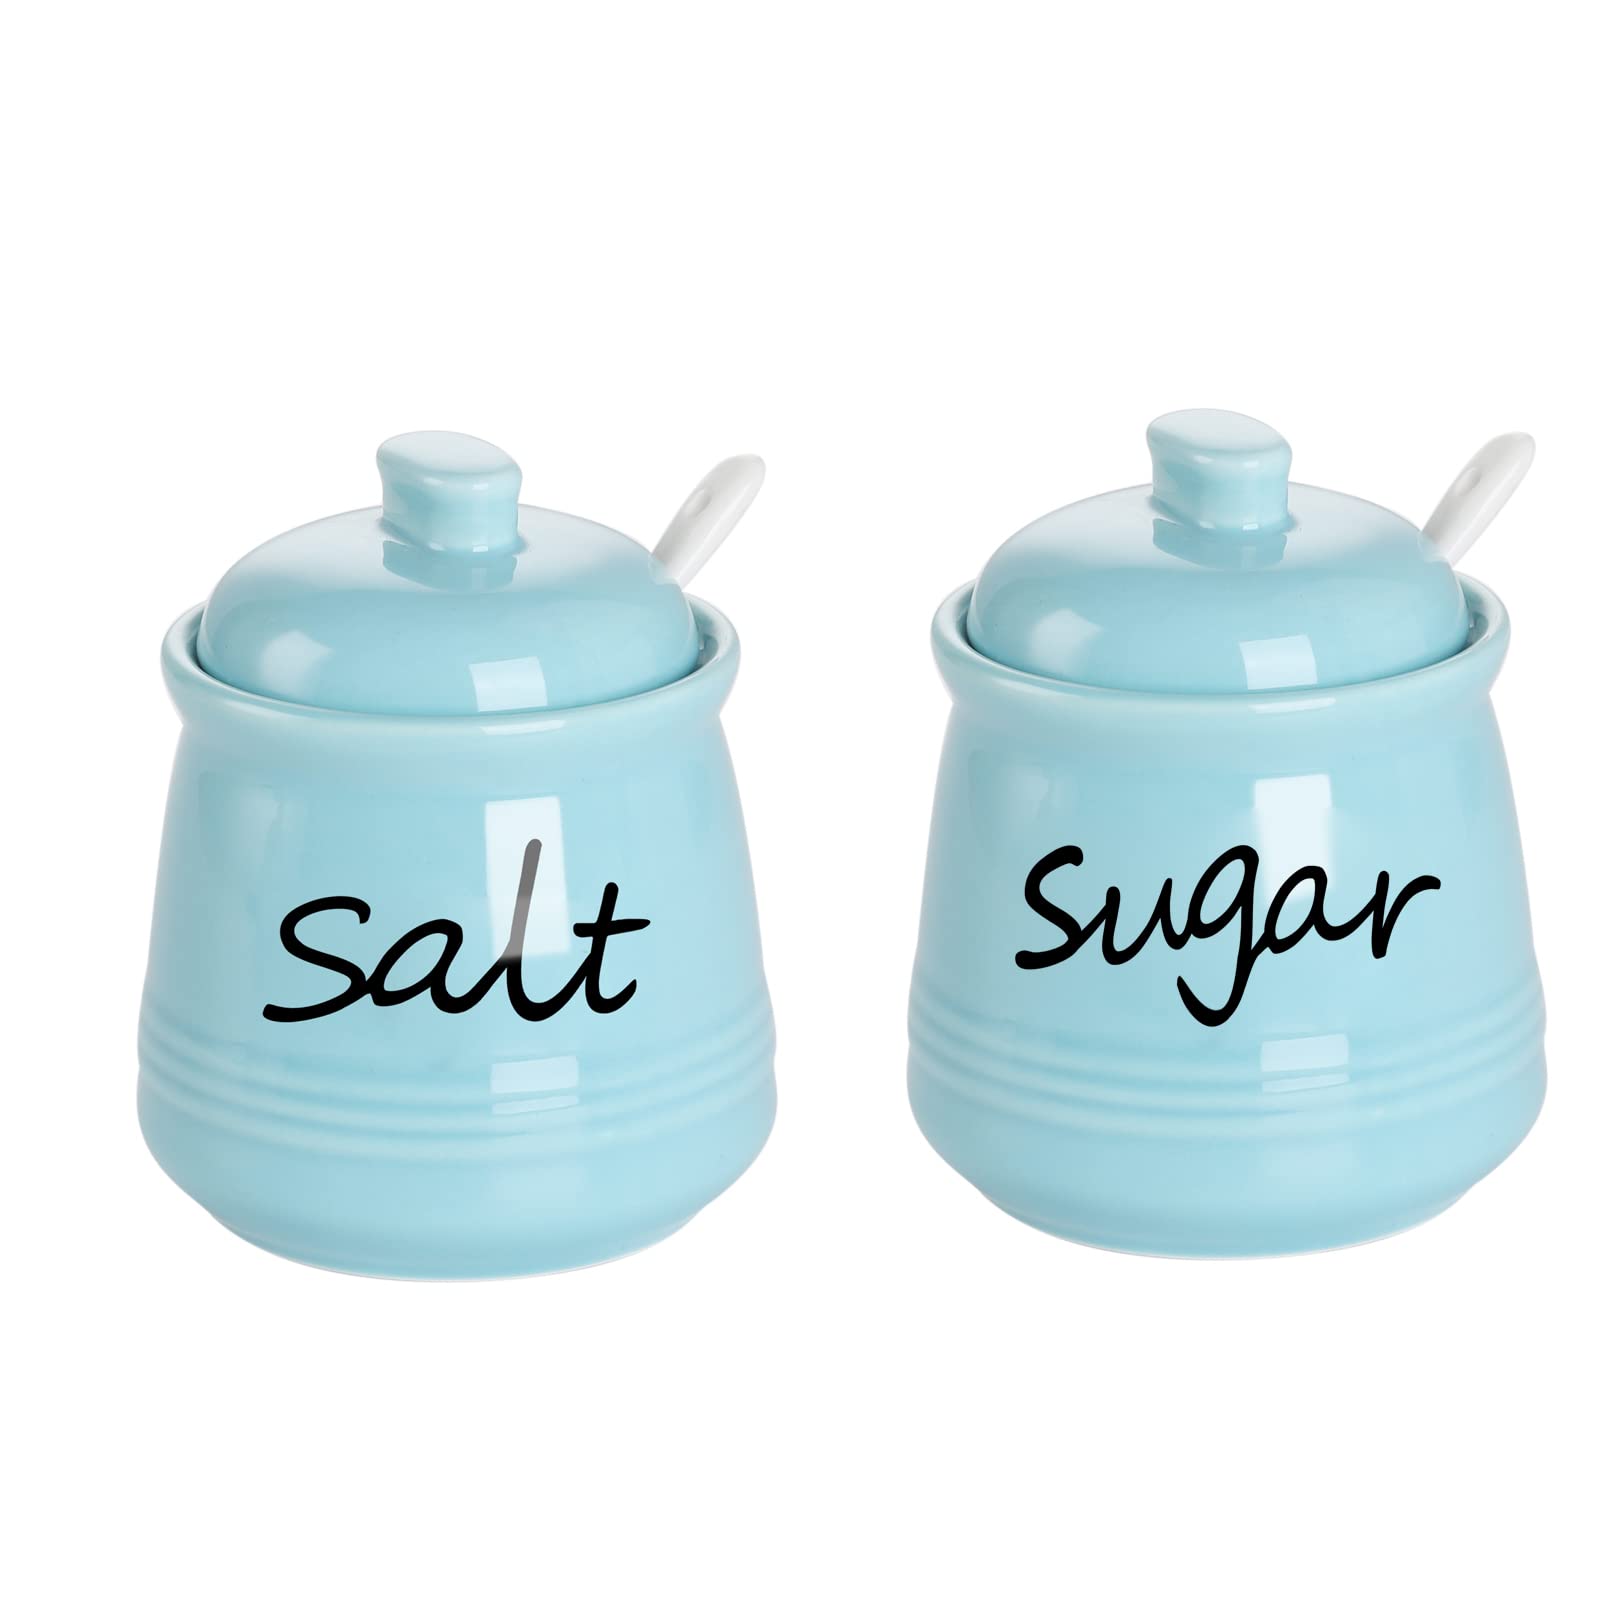 ONTUBE 12oz Sugar and Salt Bowls with Lid and Spoon, Ceramics Condiment Pots,Seasoning Jar Spice Container for Kitchen,Dishwasher Safe (Turquoise)